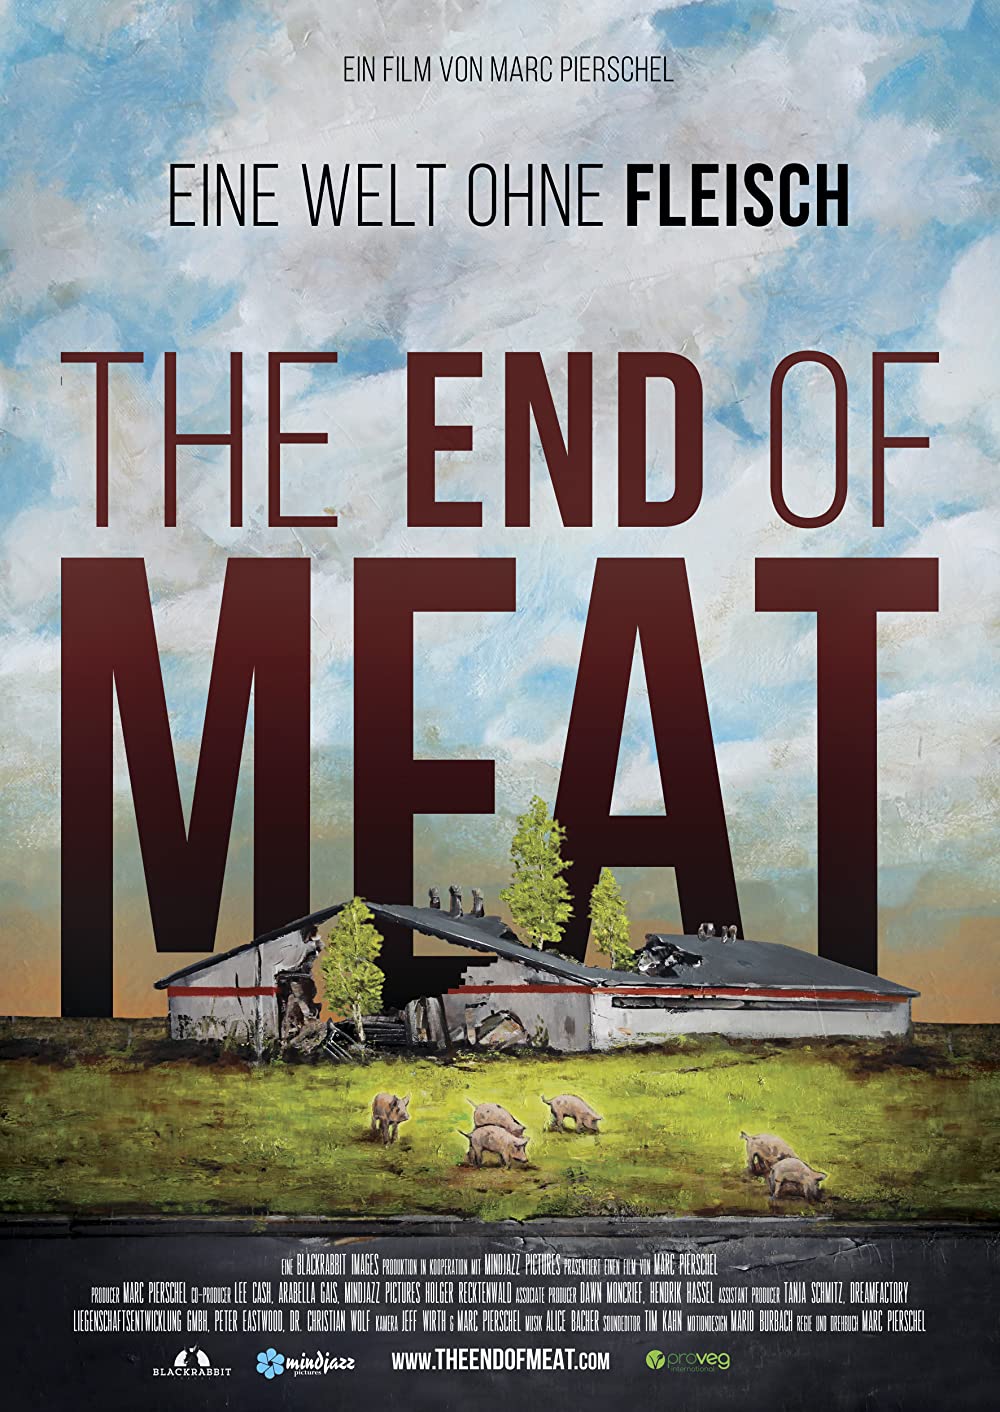 The End of Meat Vegan Documentary